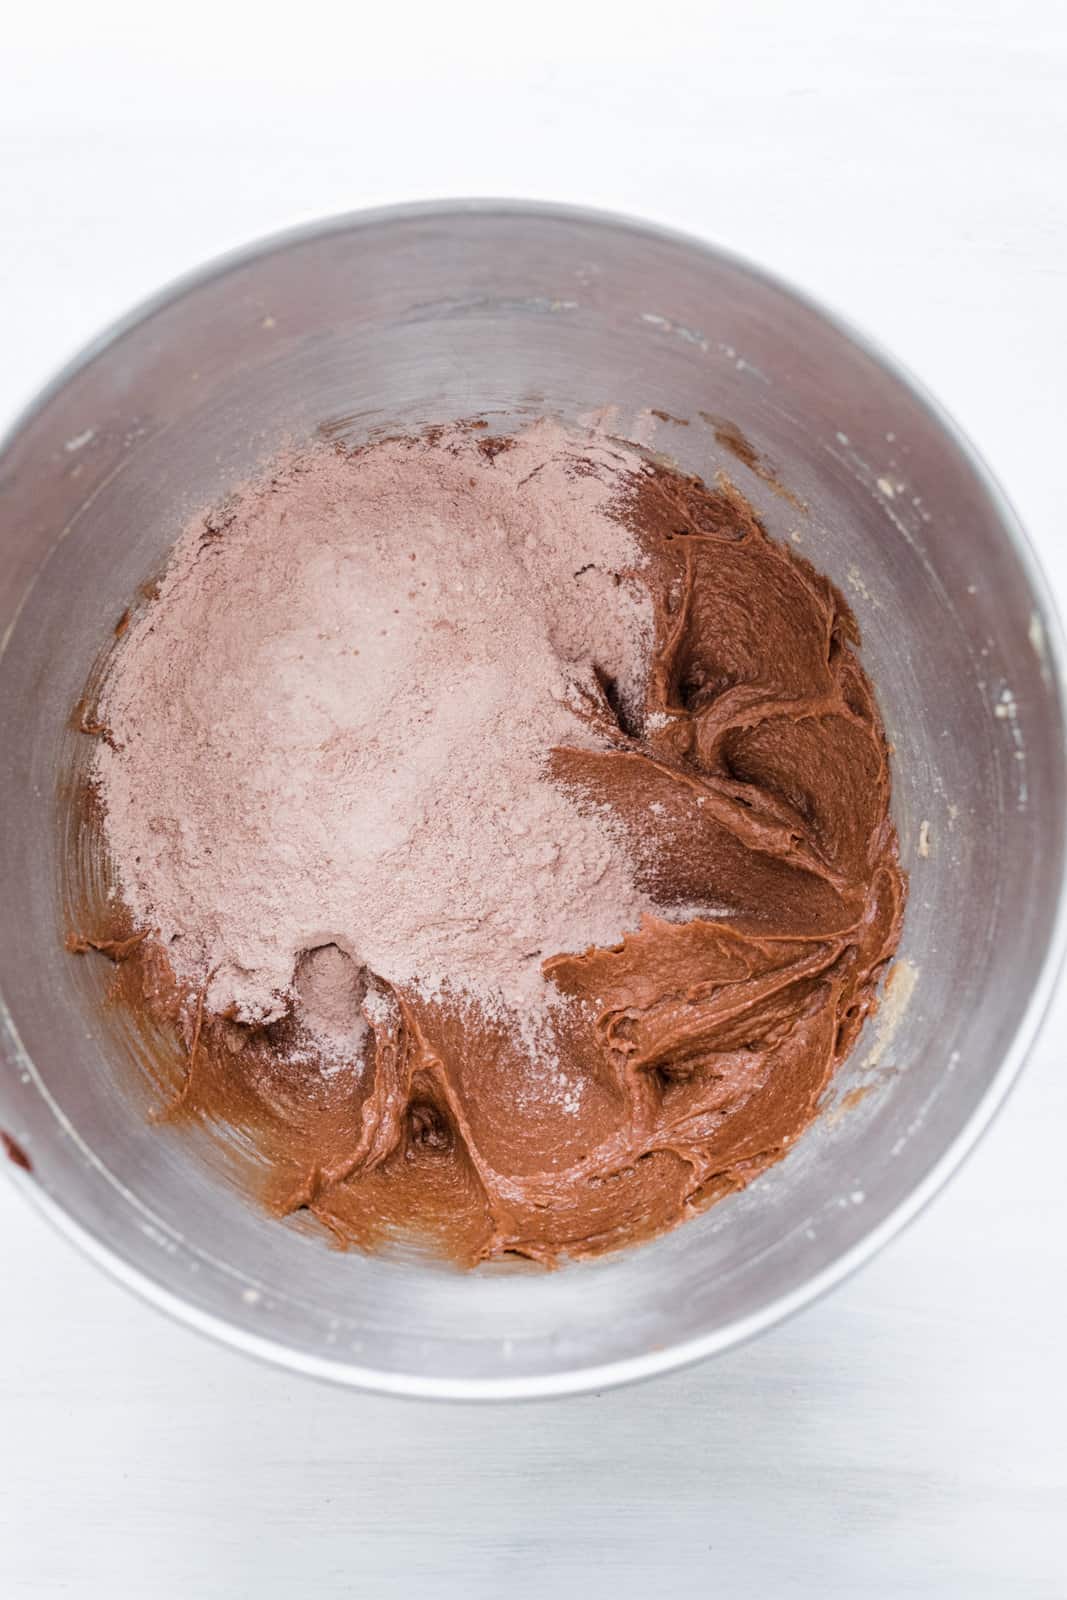 Flour and cocoa powder mixture added to bowl of stand mixer.